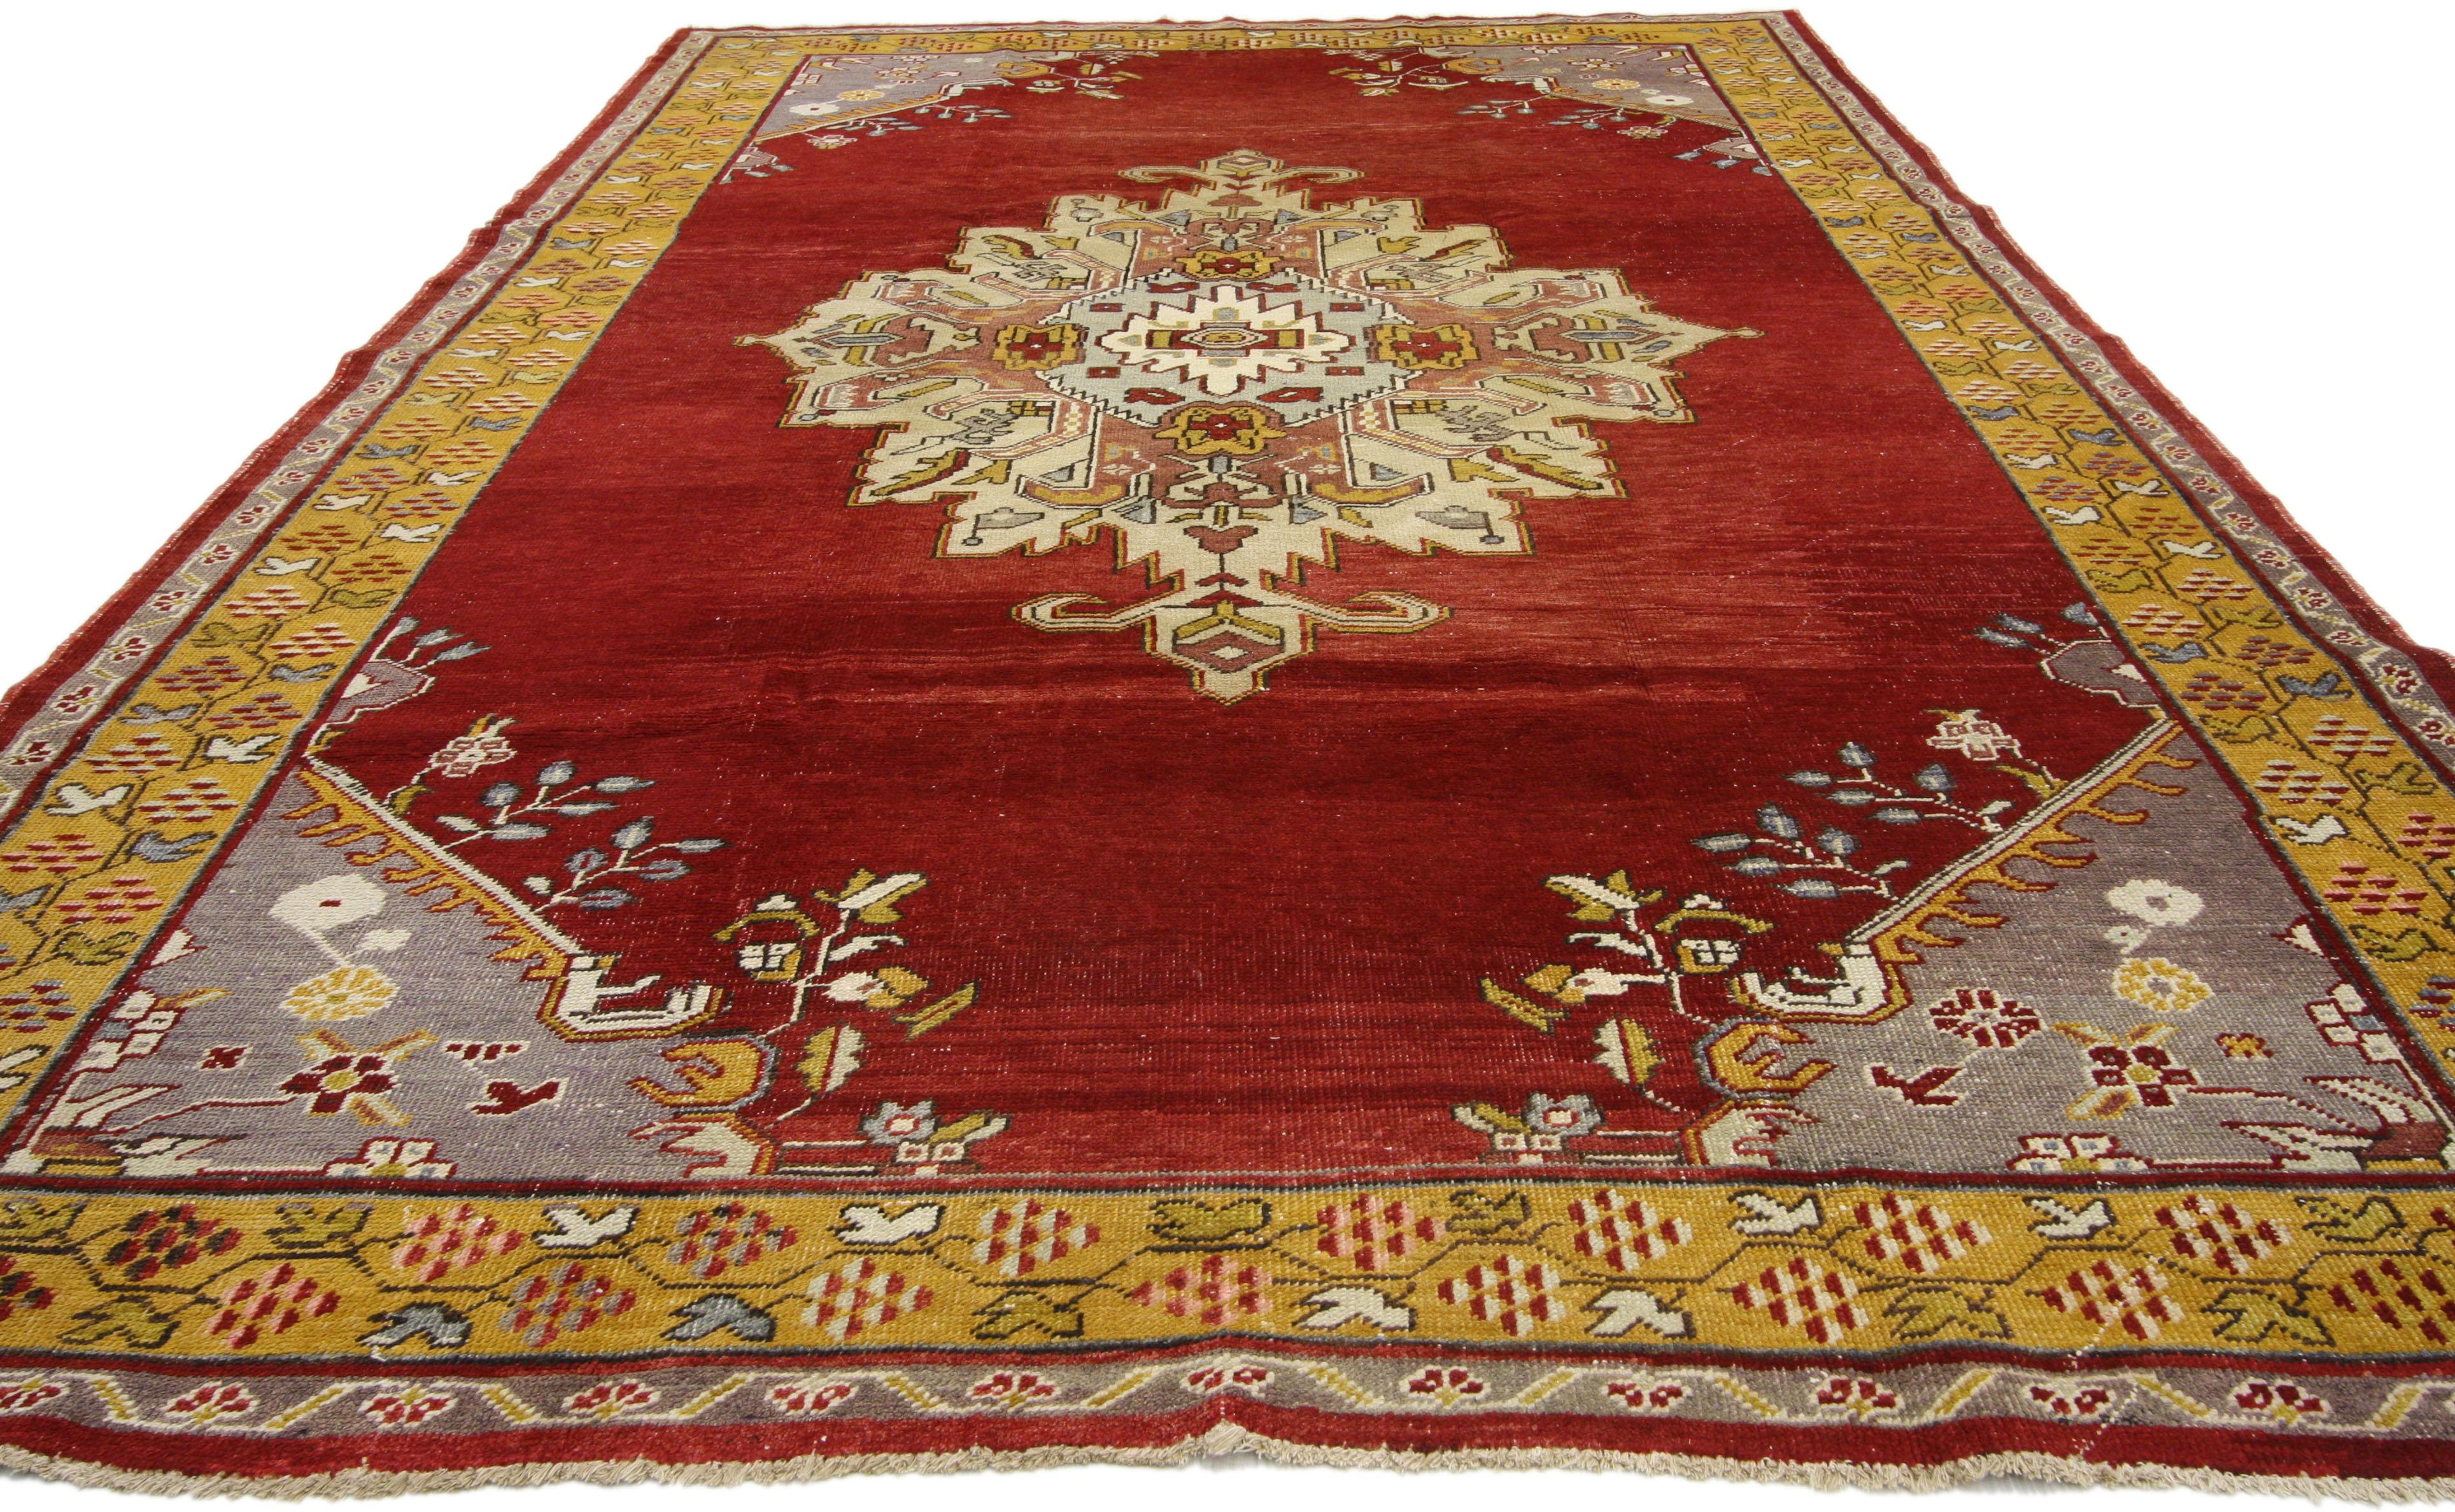 73774 Vintage Turkish Oushak rug with Regency style and vibrant colors. This hand knotted wool vintage Turkish Oushak rug features a large lobed central medallion with hands-on-hips pendants floating on an abrashed ruby red field. Palmettes, open